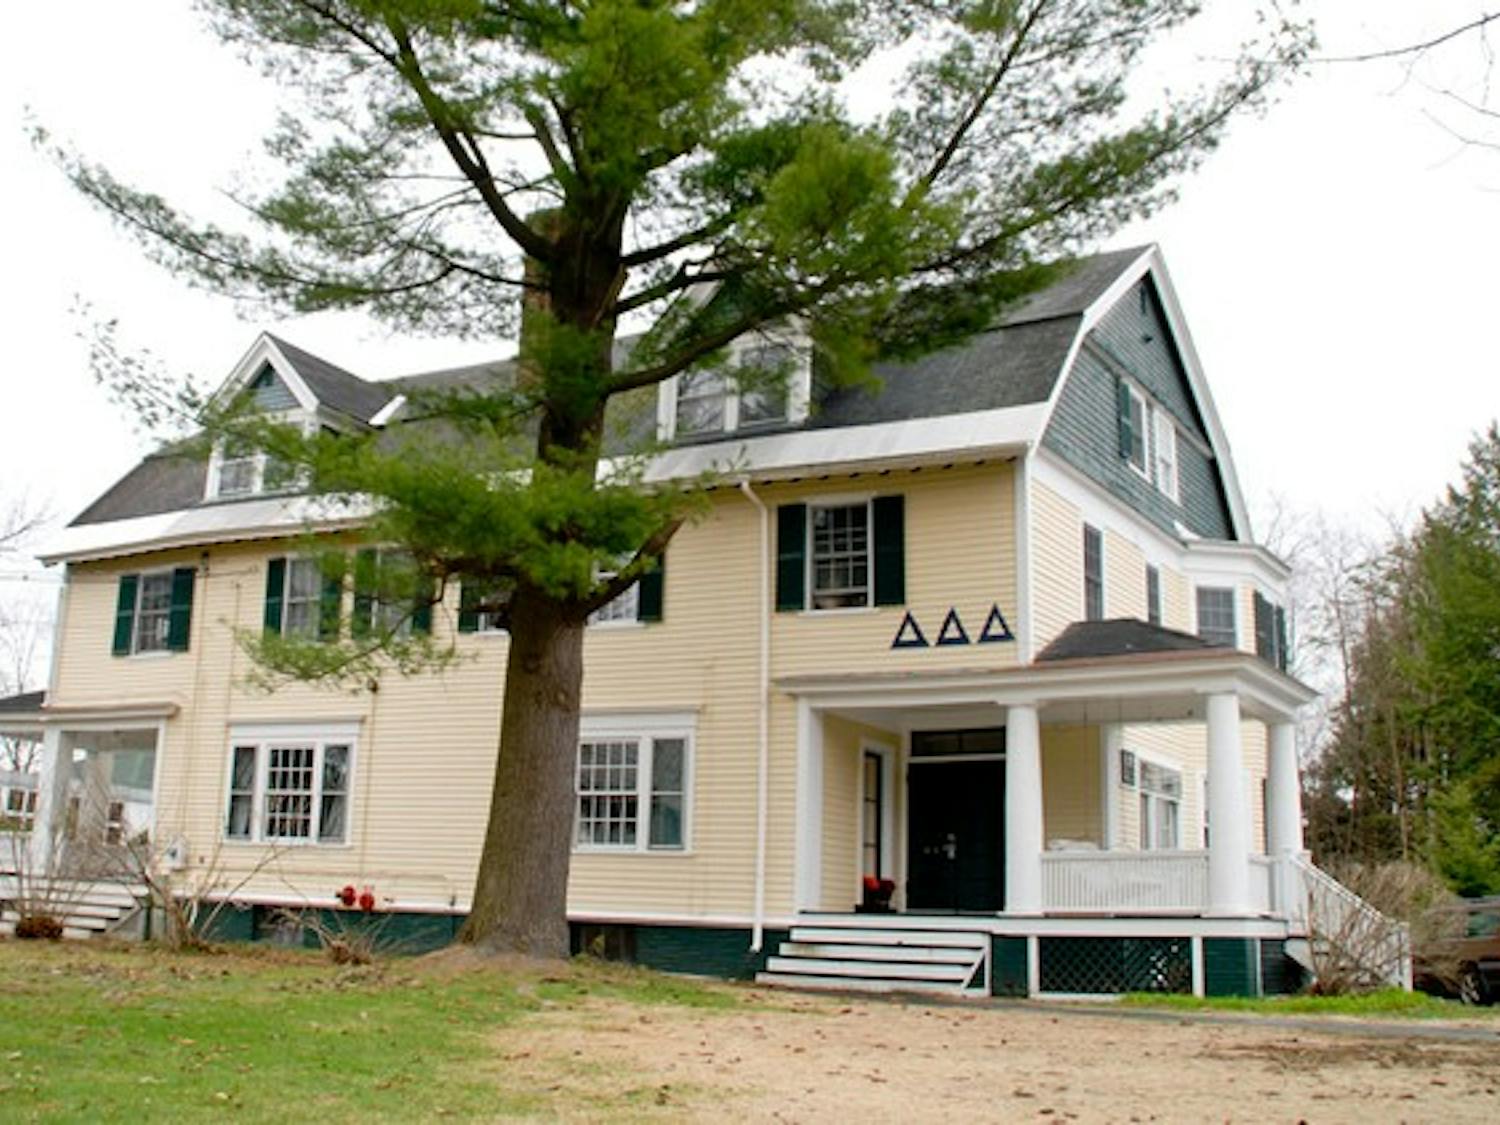 About $1 million is being spent to renovate Delta Delta Delta sorority.